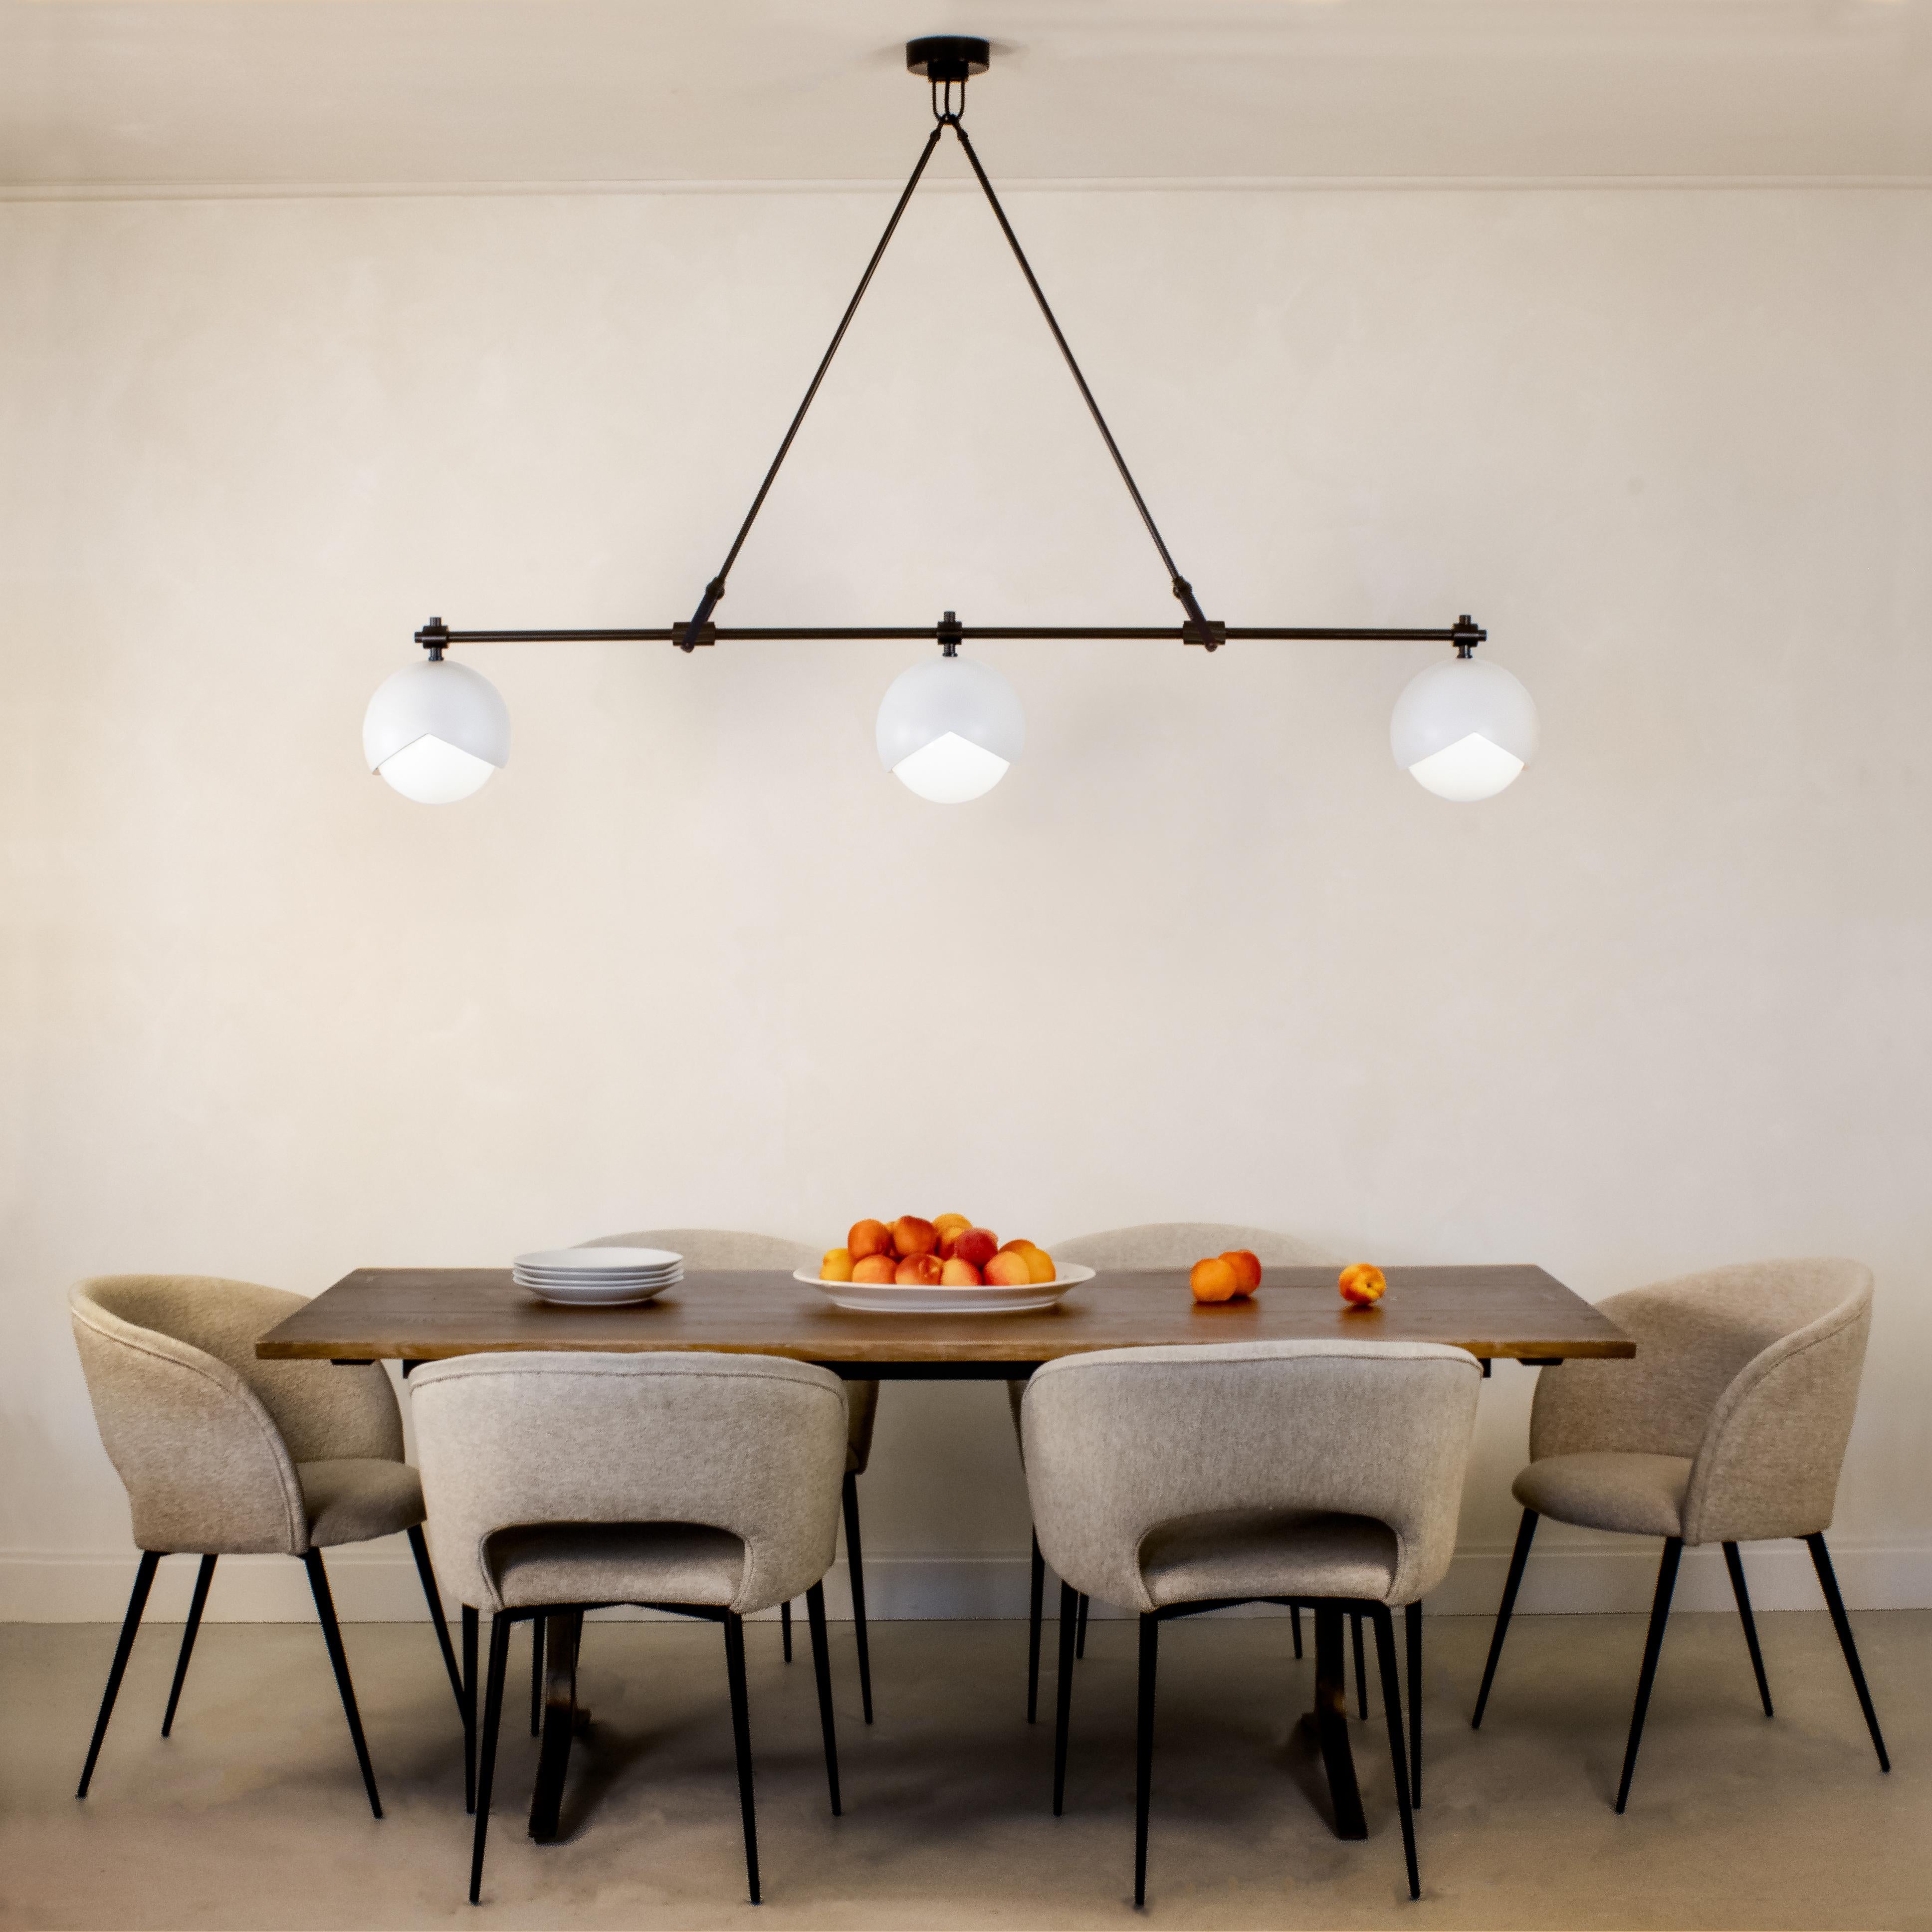 Three 9 inch Benedict™ light assemblies form a linear array held together with finely detailed joinery. Available in any height, this chandelier is an inviting centerpiece for any kitchen island, dining table, conference table, or artists’ studio